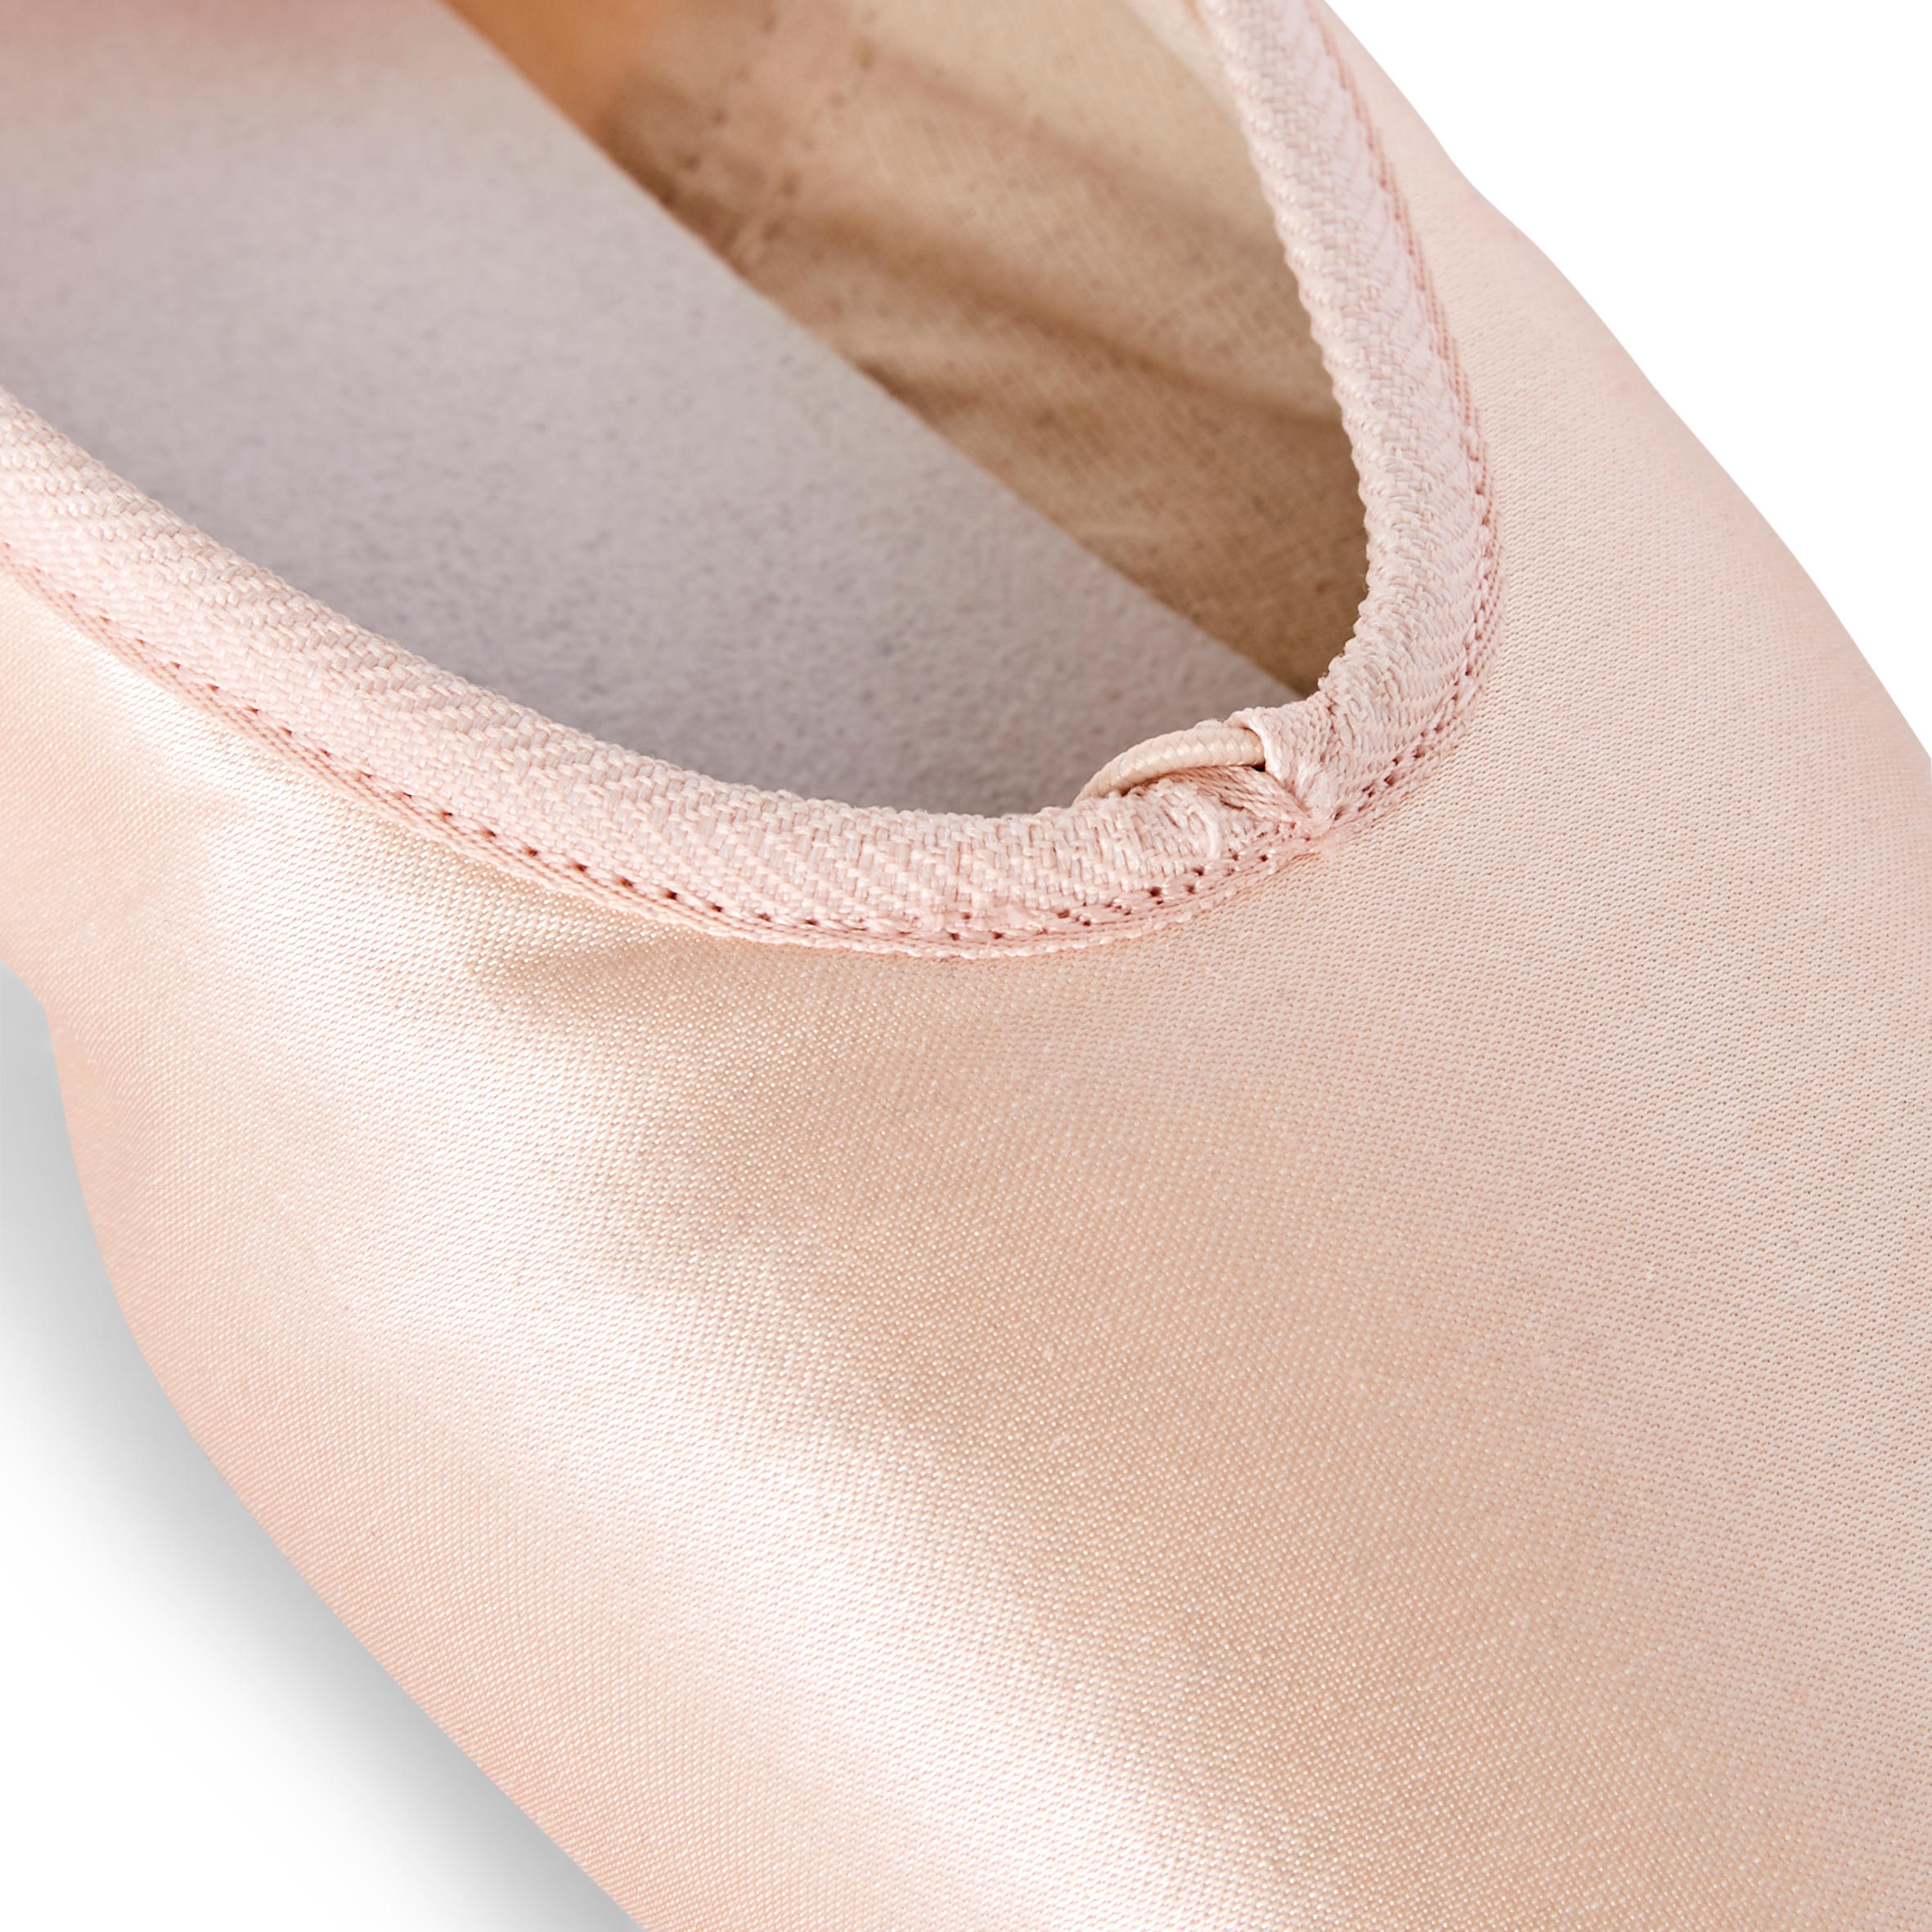 Beginner Pointe Shoes with Flexible Soles - Sizes 1 to 8 2/6